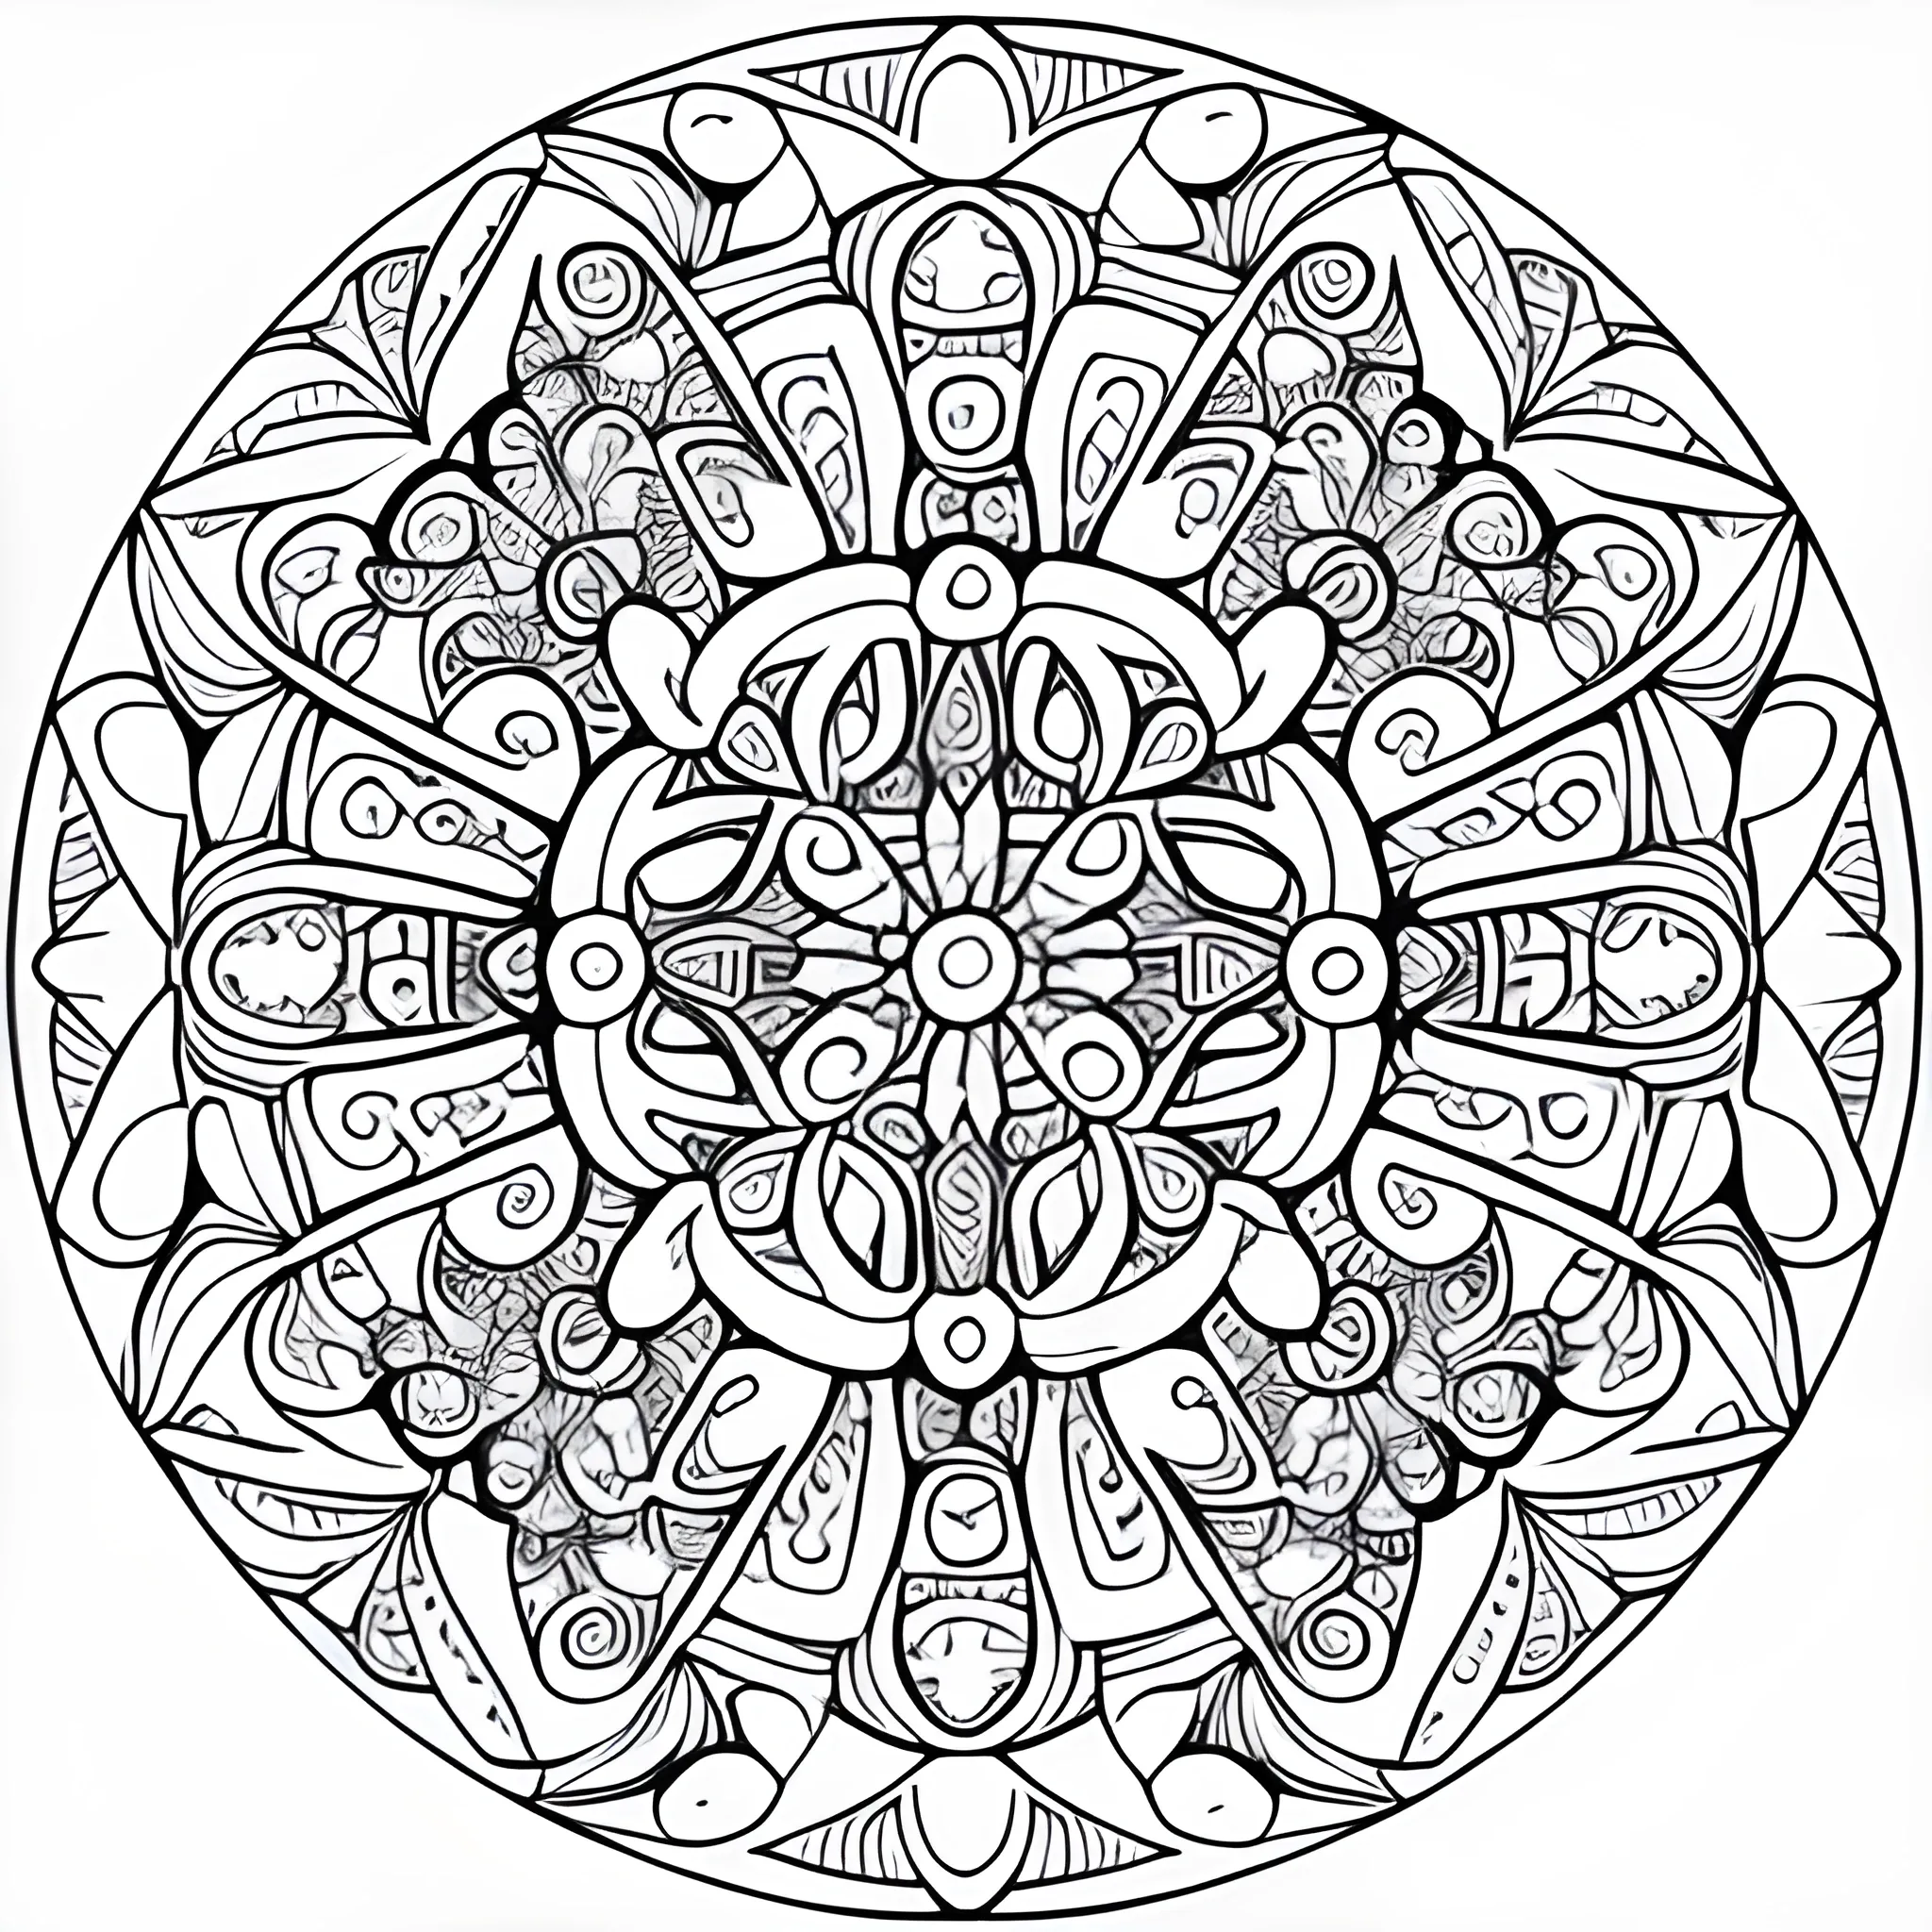 coloring book page detailed mandala spanish, design of fantasy, inside a floral circle, white background, stencil bold lines, inspired in the spanish culture, too many forms